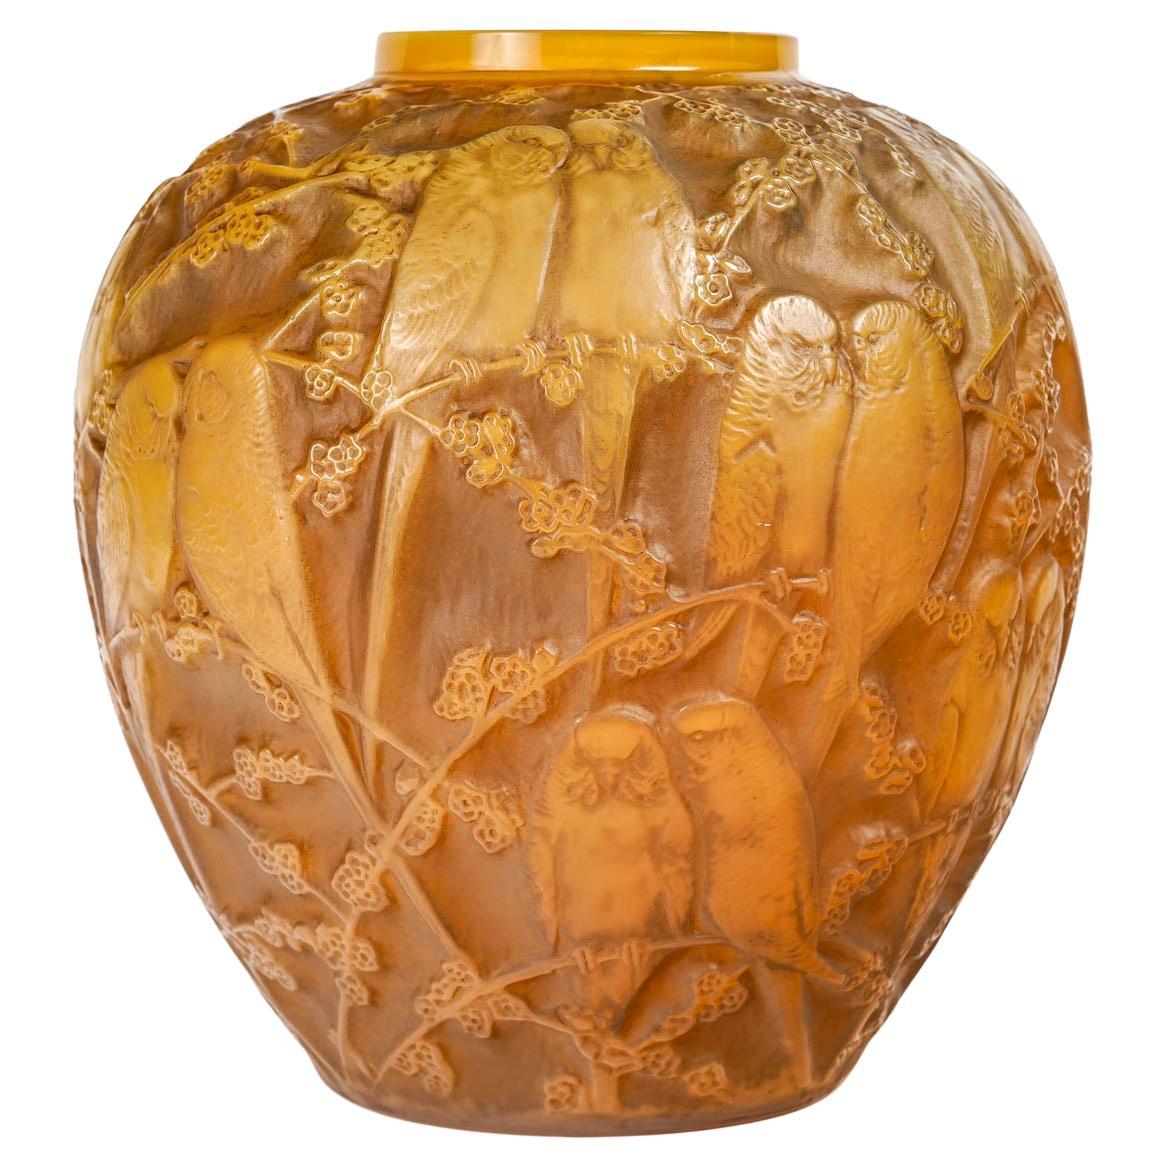 1919 Rene Lalique Vase Perruches Cased Butterscotch Glass with Sepia Patina For Sale